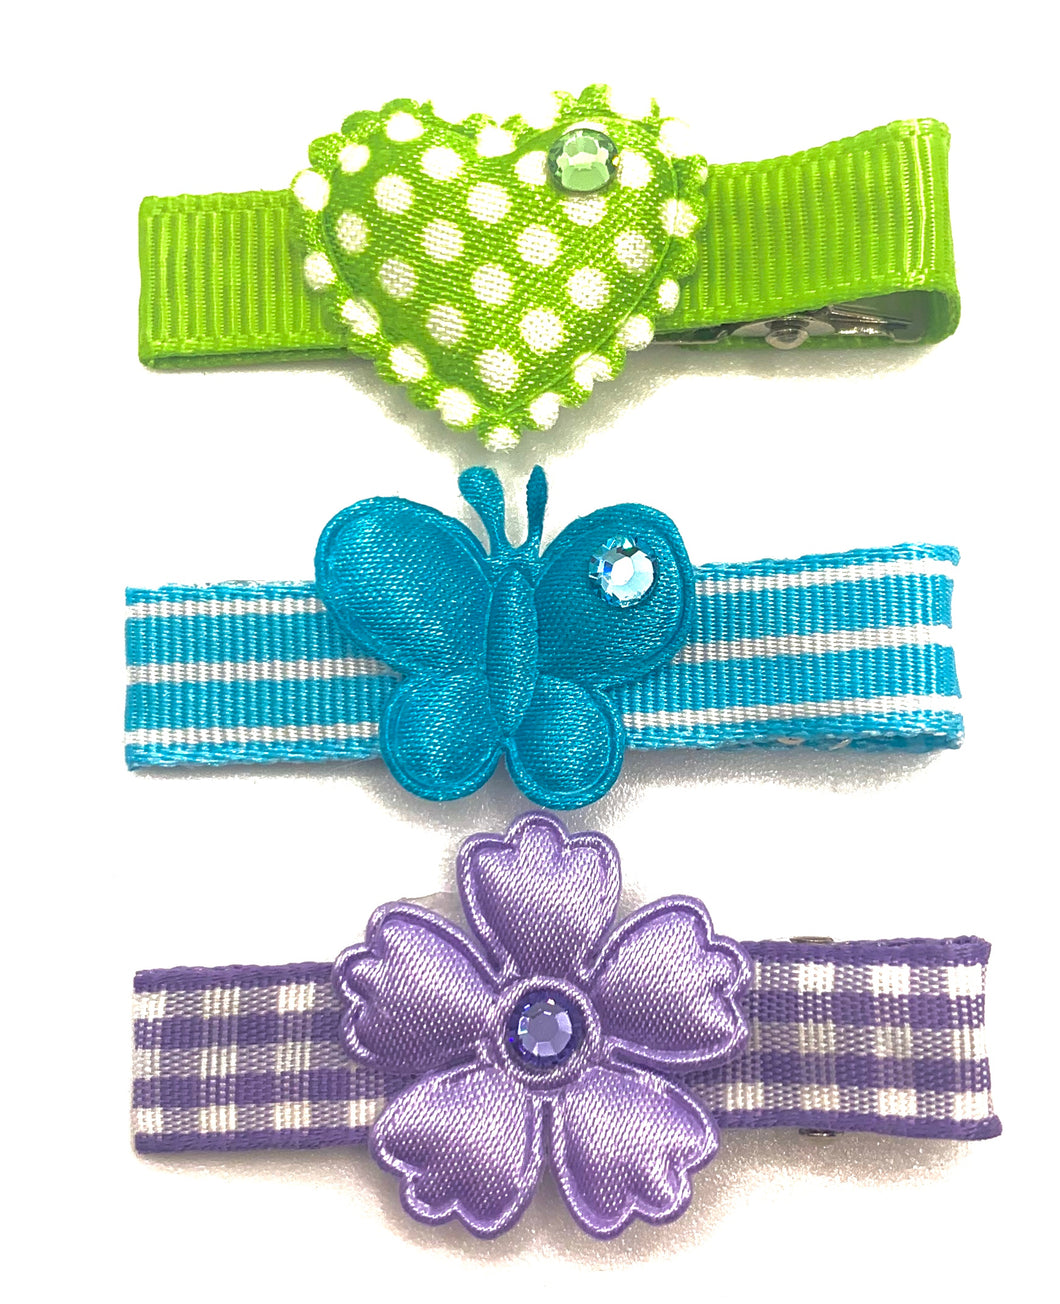 G.BIV Hair Clip Set with a touch of Bling!